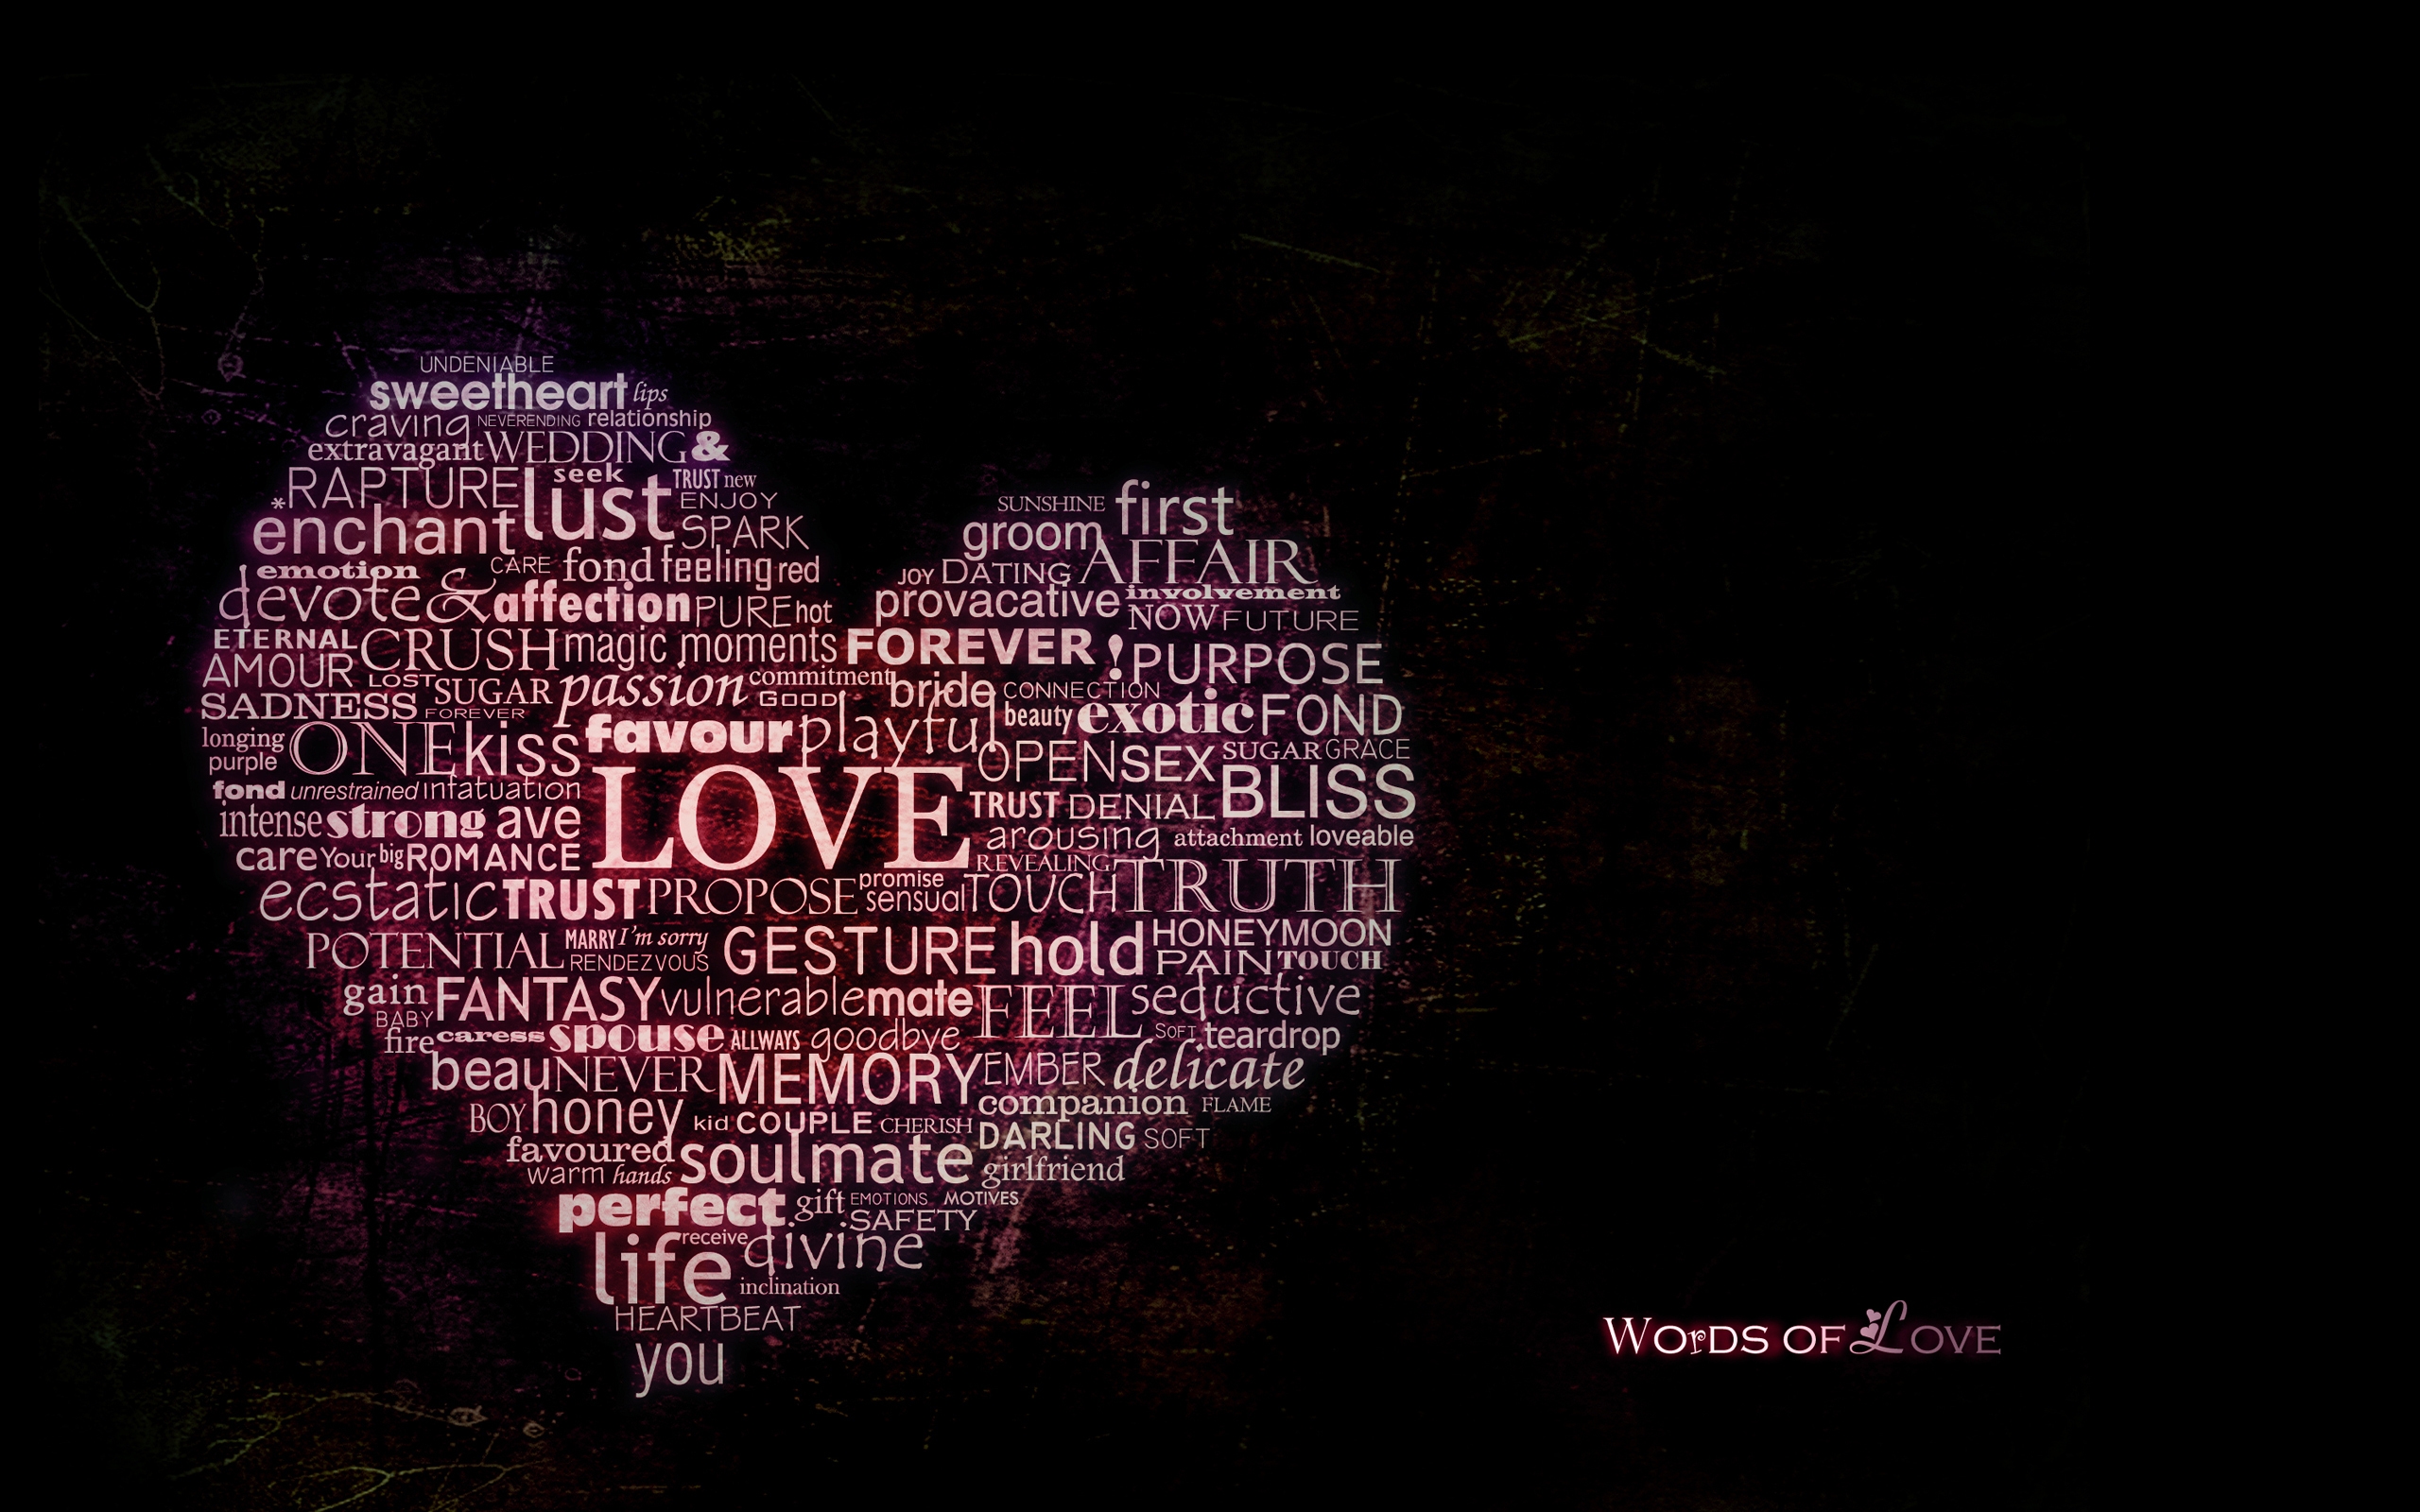 Words of Love for 2560 x 1600 widescreen resolution